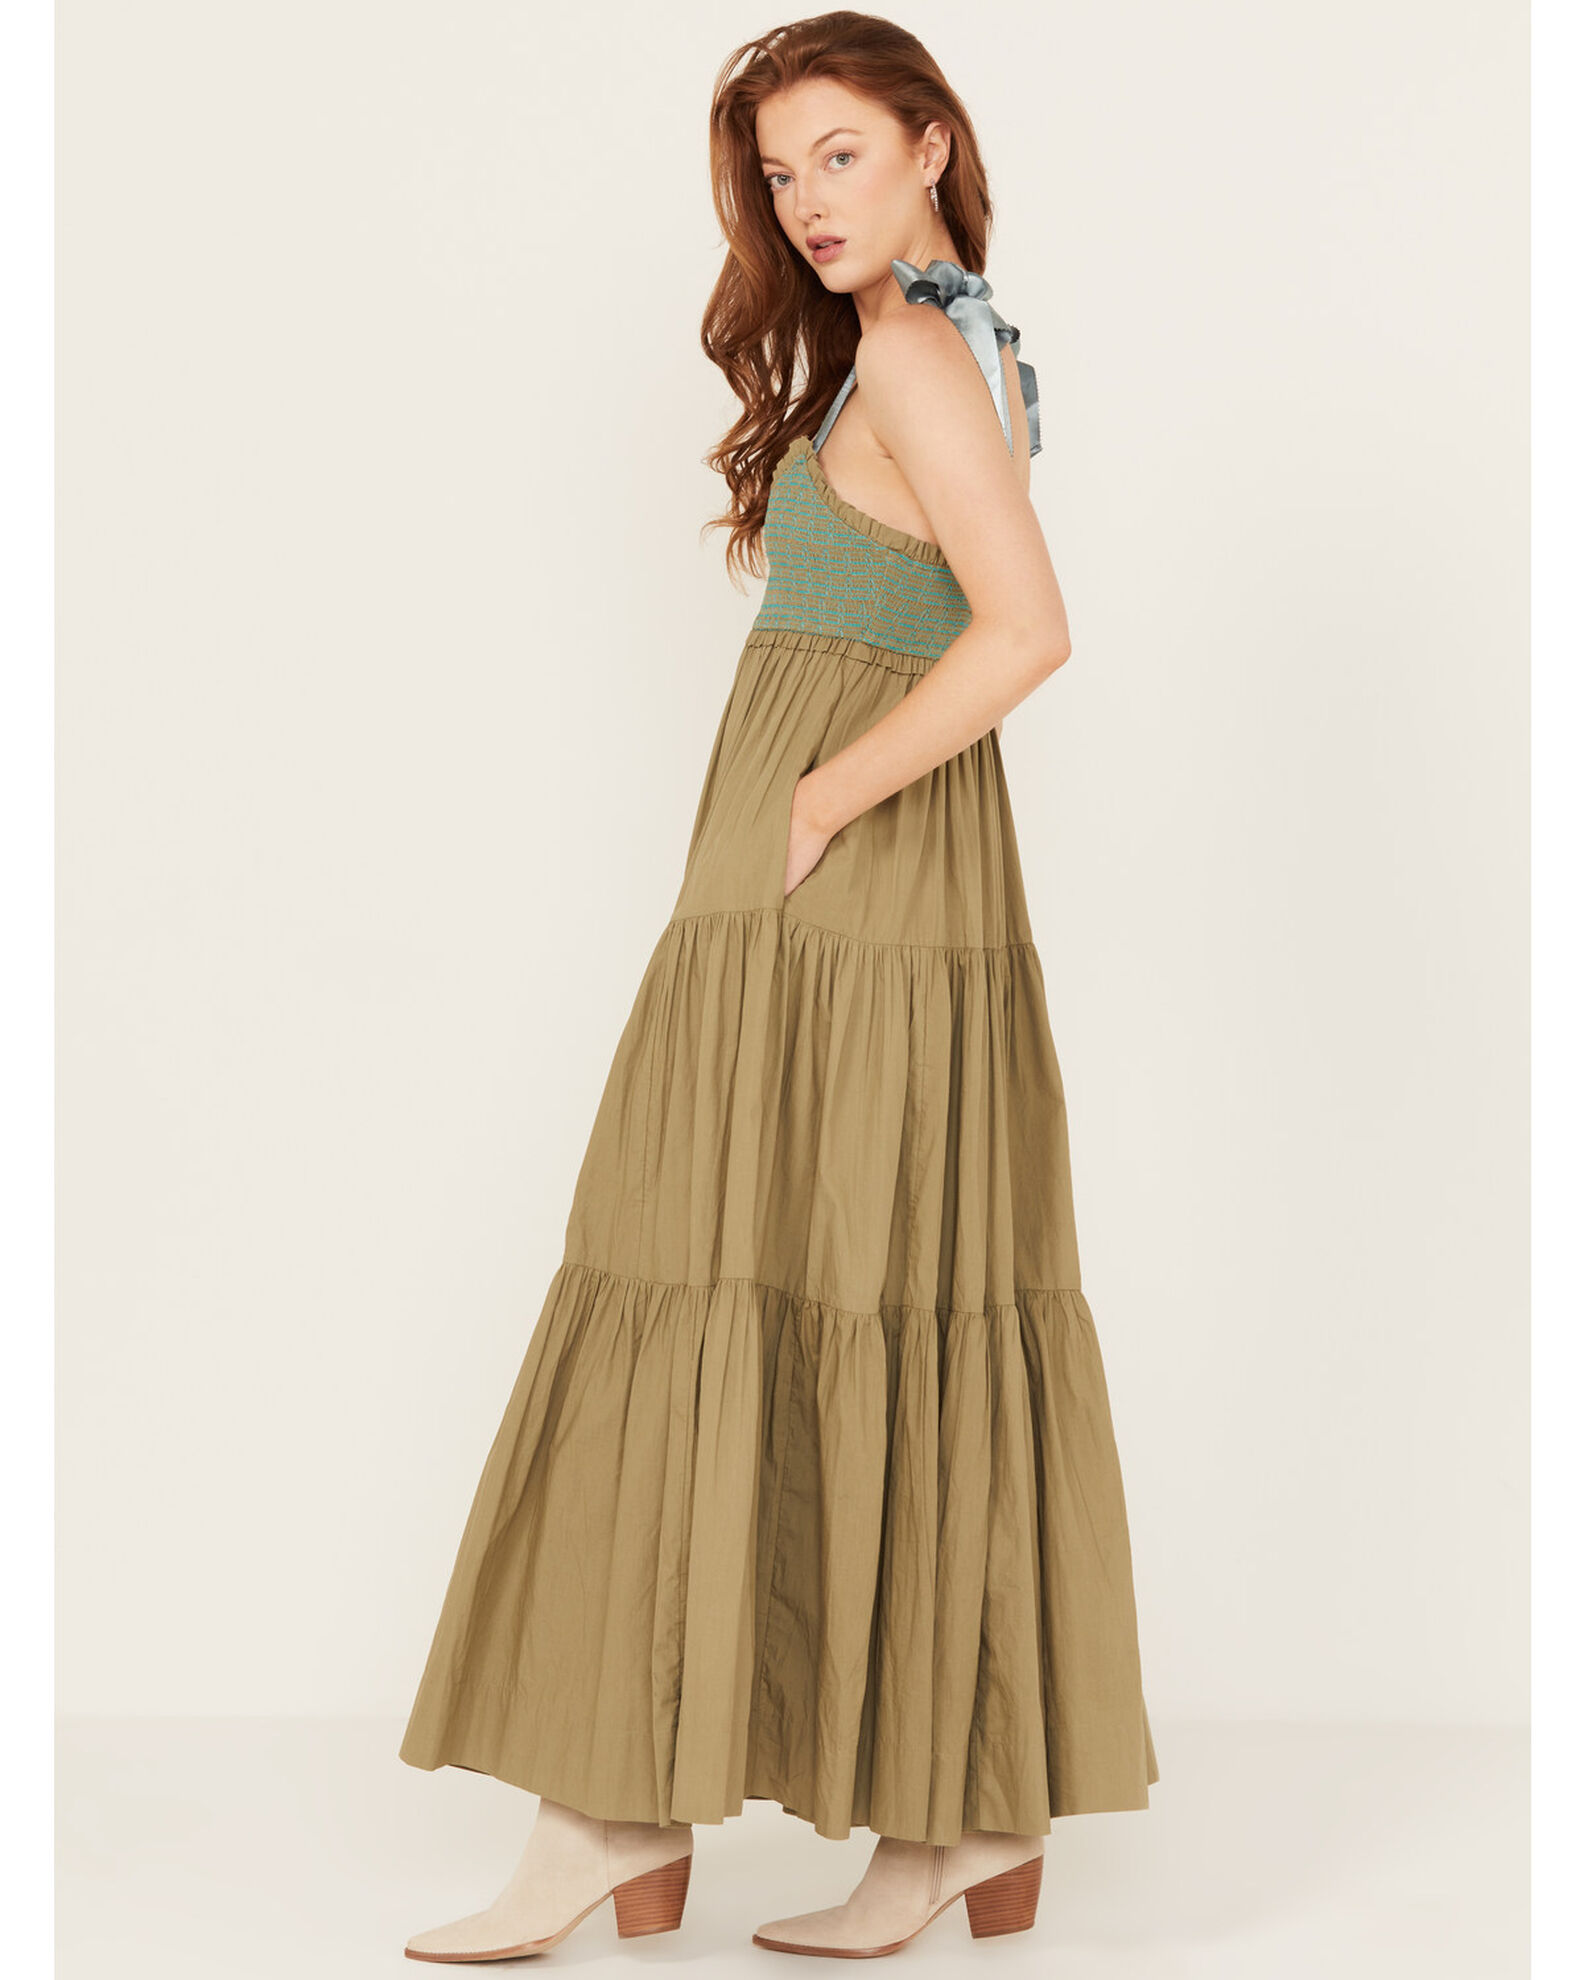 Free People Women's Bluebell Solid Maxi Dress